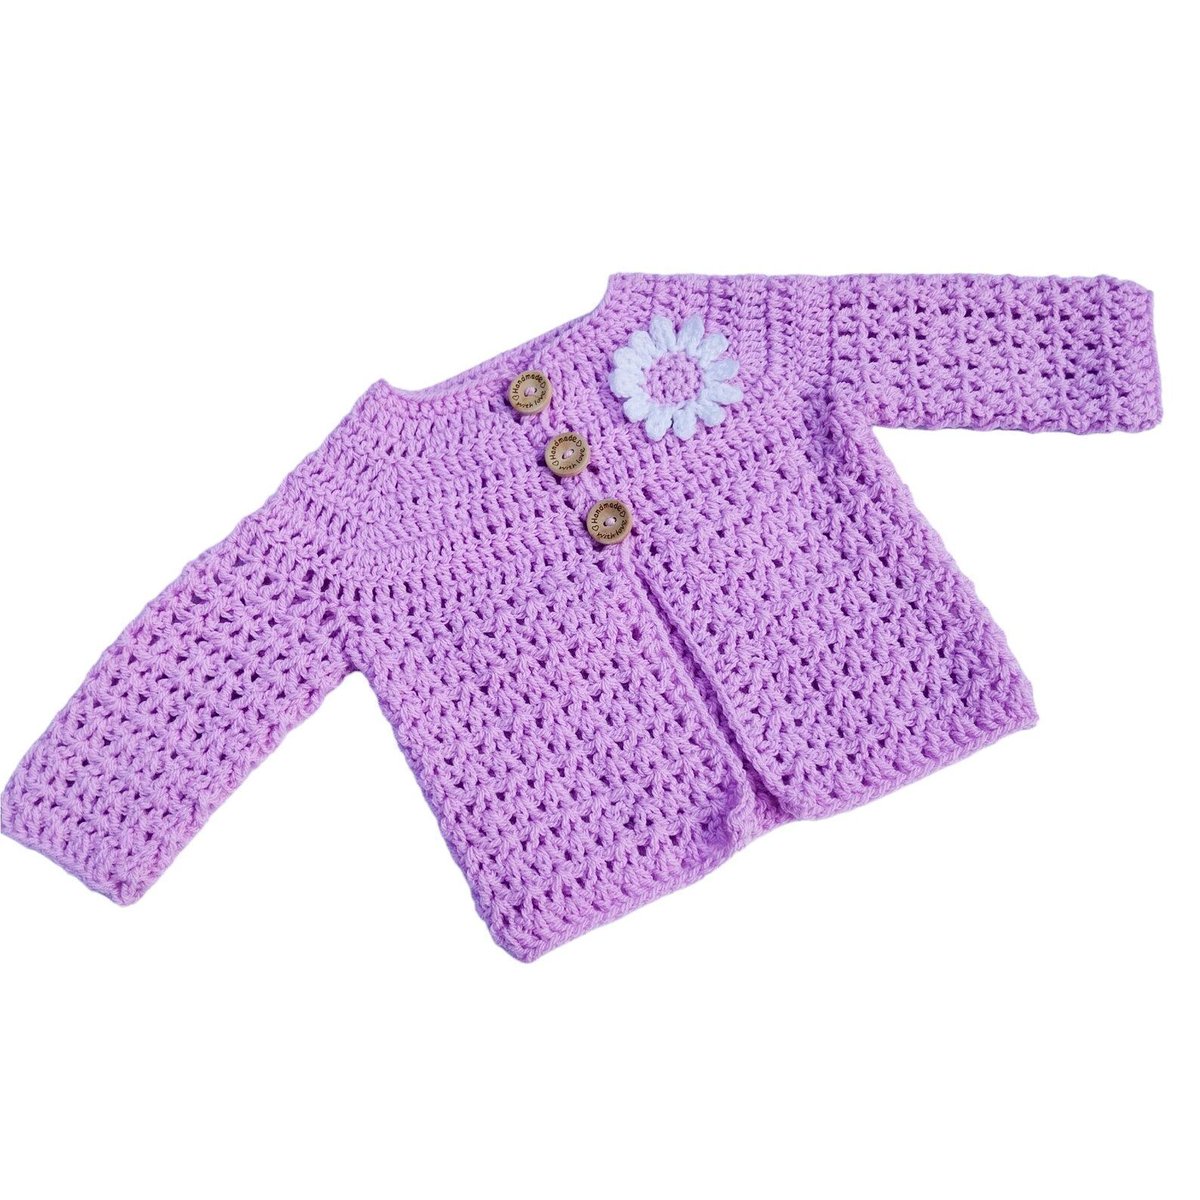 Dress your little girl in this elegantly crocheted lilac cardigan with eye-catching white daisy details! Handmade with love by #Knittingtopia. Shop now: knittingtopia.etsy.com/listing/158332… #BabyStyle #etsy #handmade #UKHashtags #WomenInBiz #craftbizparty